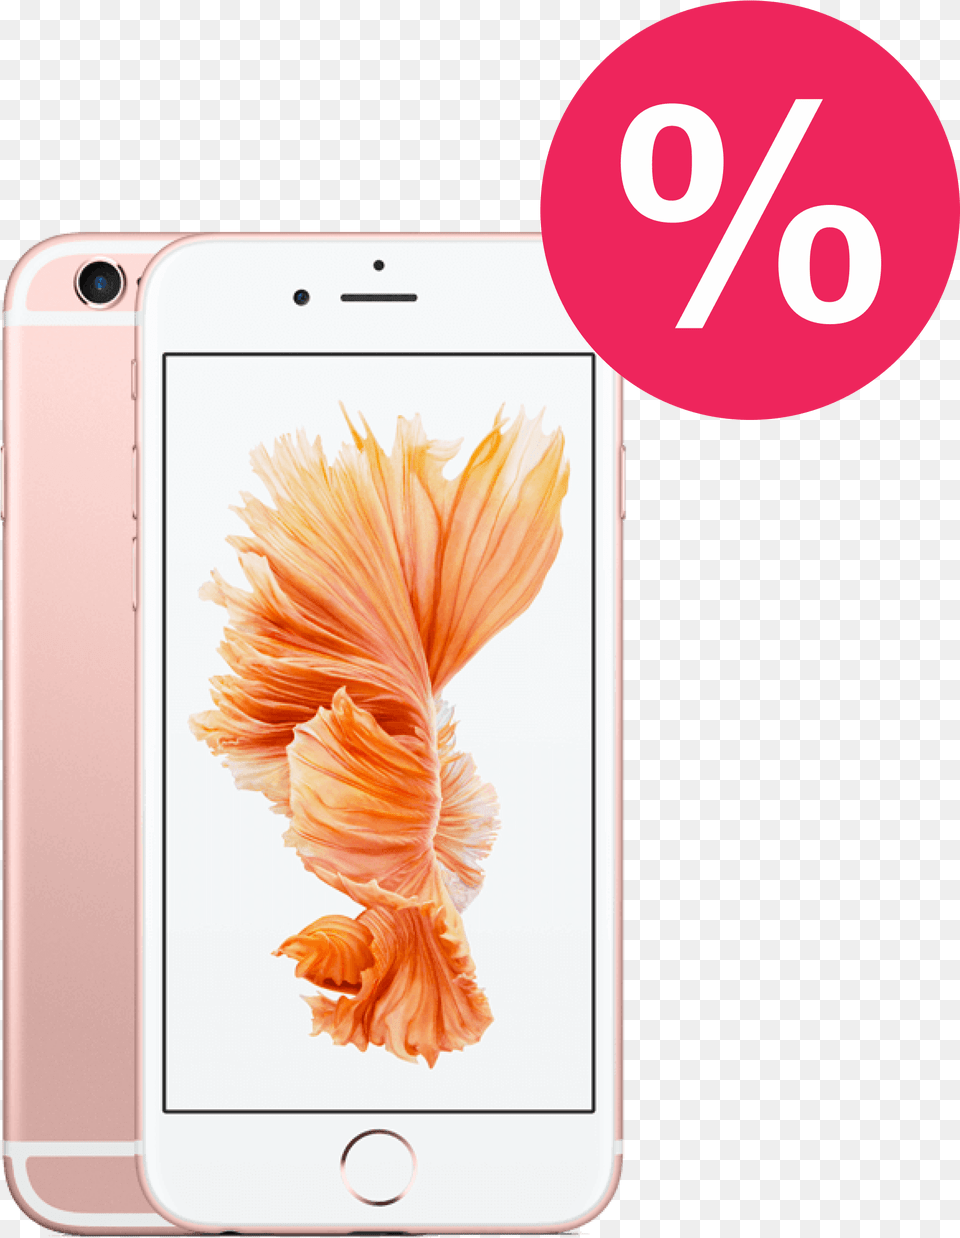 Transparent Iphone 6s Rose Gold Iphone 6s Plus Price In Sri Lanka, Electronics, Mobile Phone, Phone Free Png Download